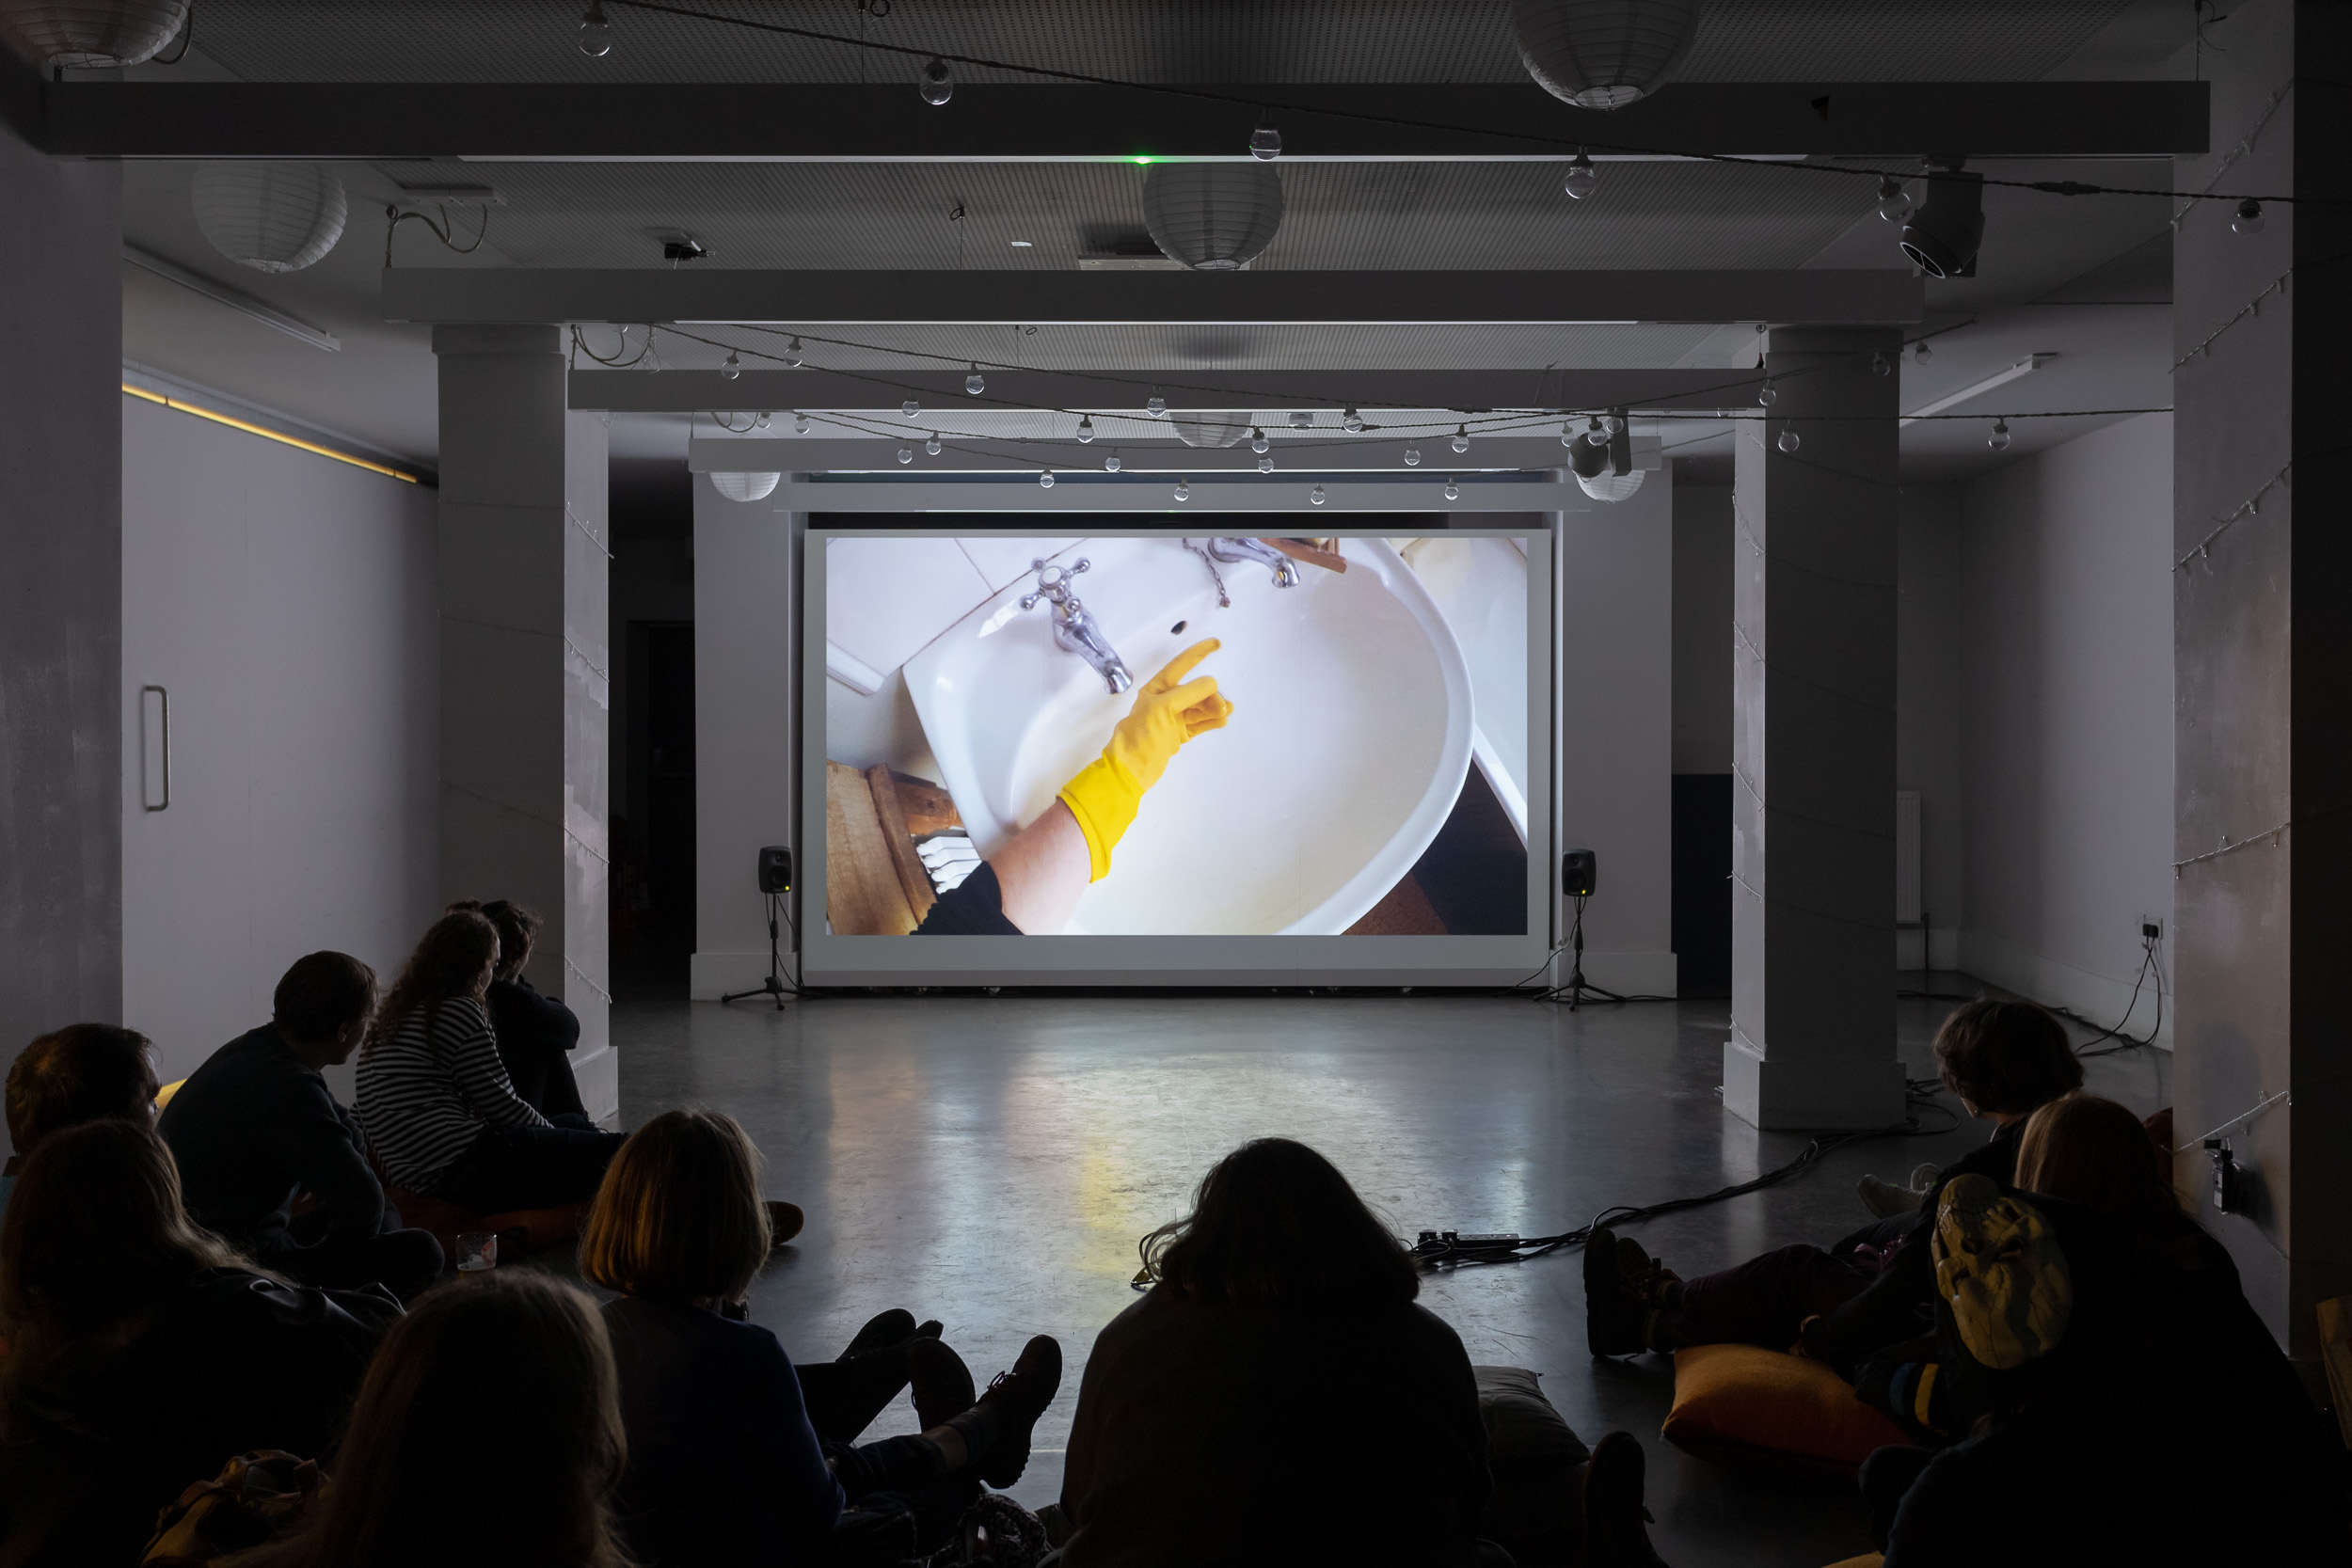 A film screened in a gallery, with people gathered to watch. On screen a hand in a yellow rubber glove points towards a white porcelain sink.